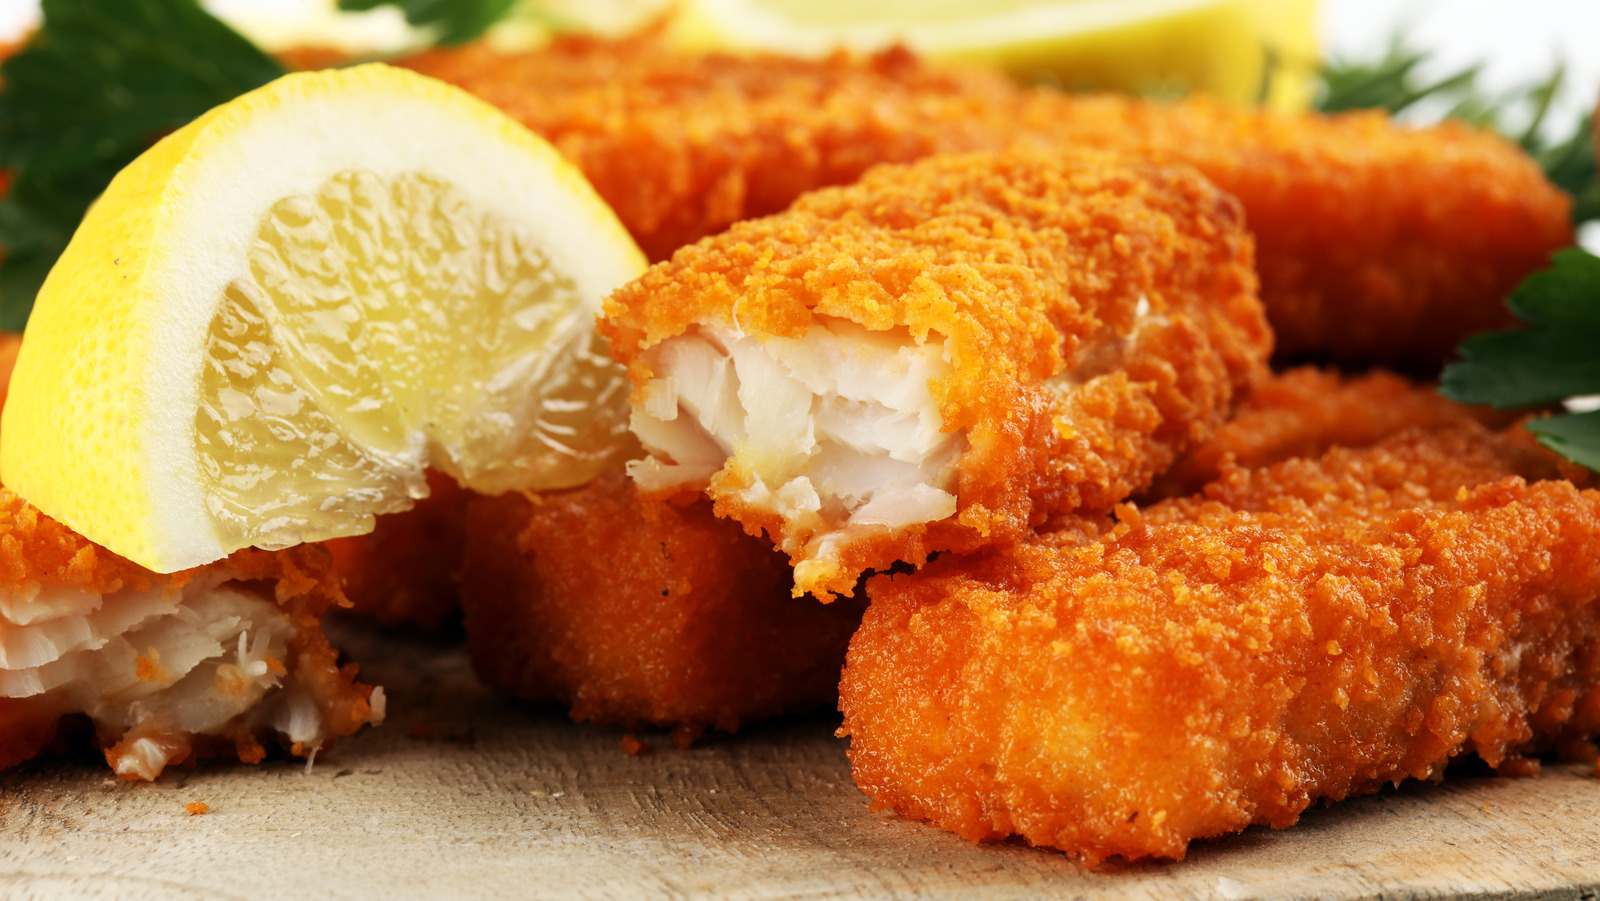 What You're Really Eating When You Eat Fish Sticks